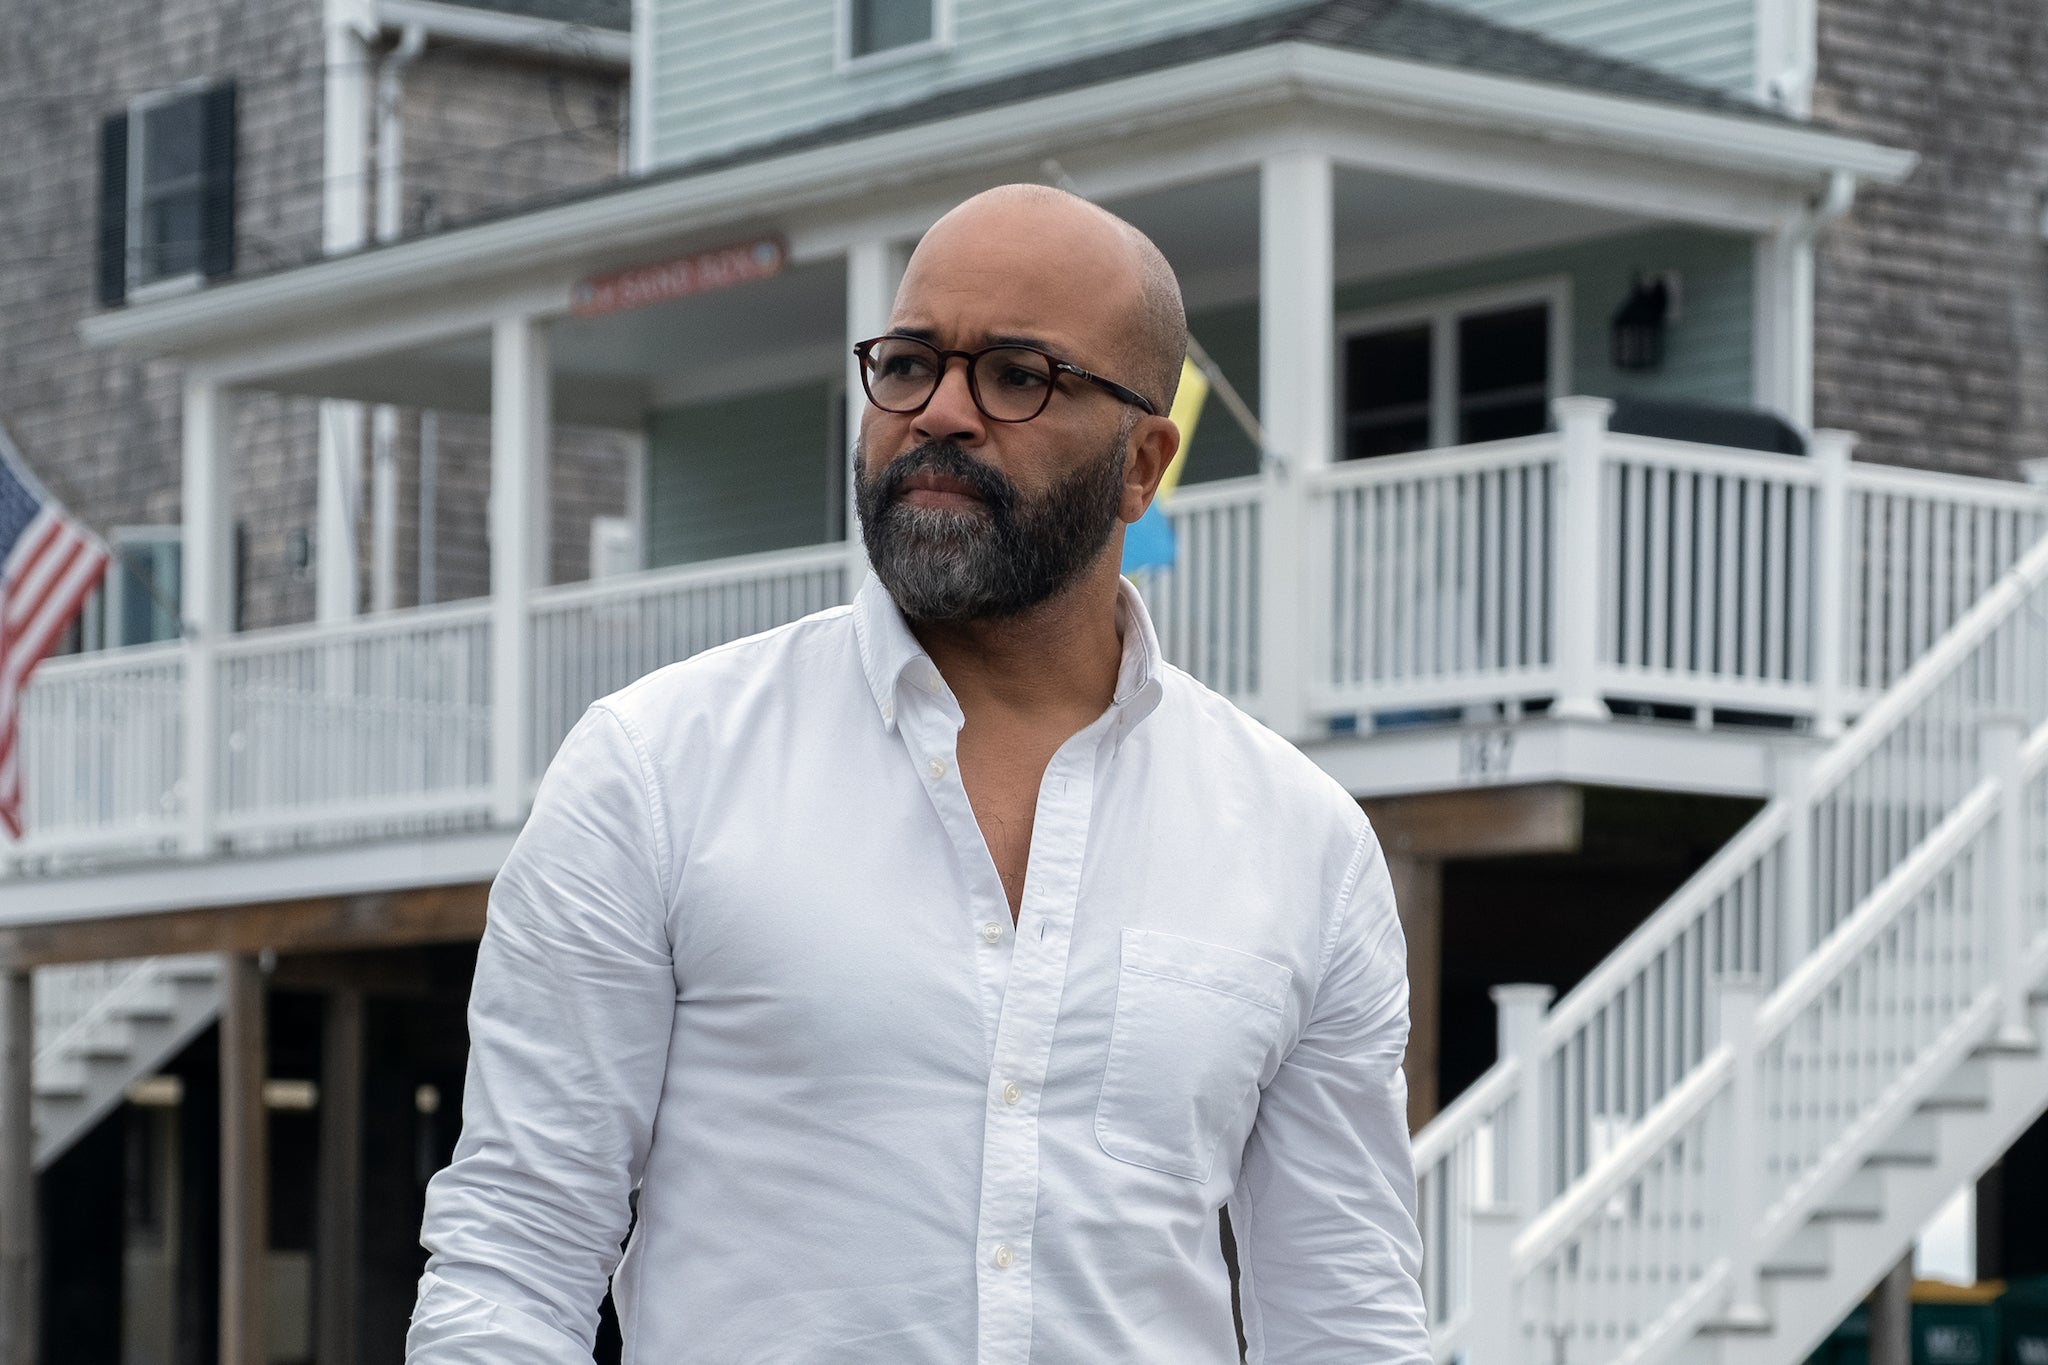 Jeffrey Wright is being praised for his wonderfully sly and affecting performance as Monk: a thoughtful, middle-class man simmering with explosive resentment